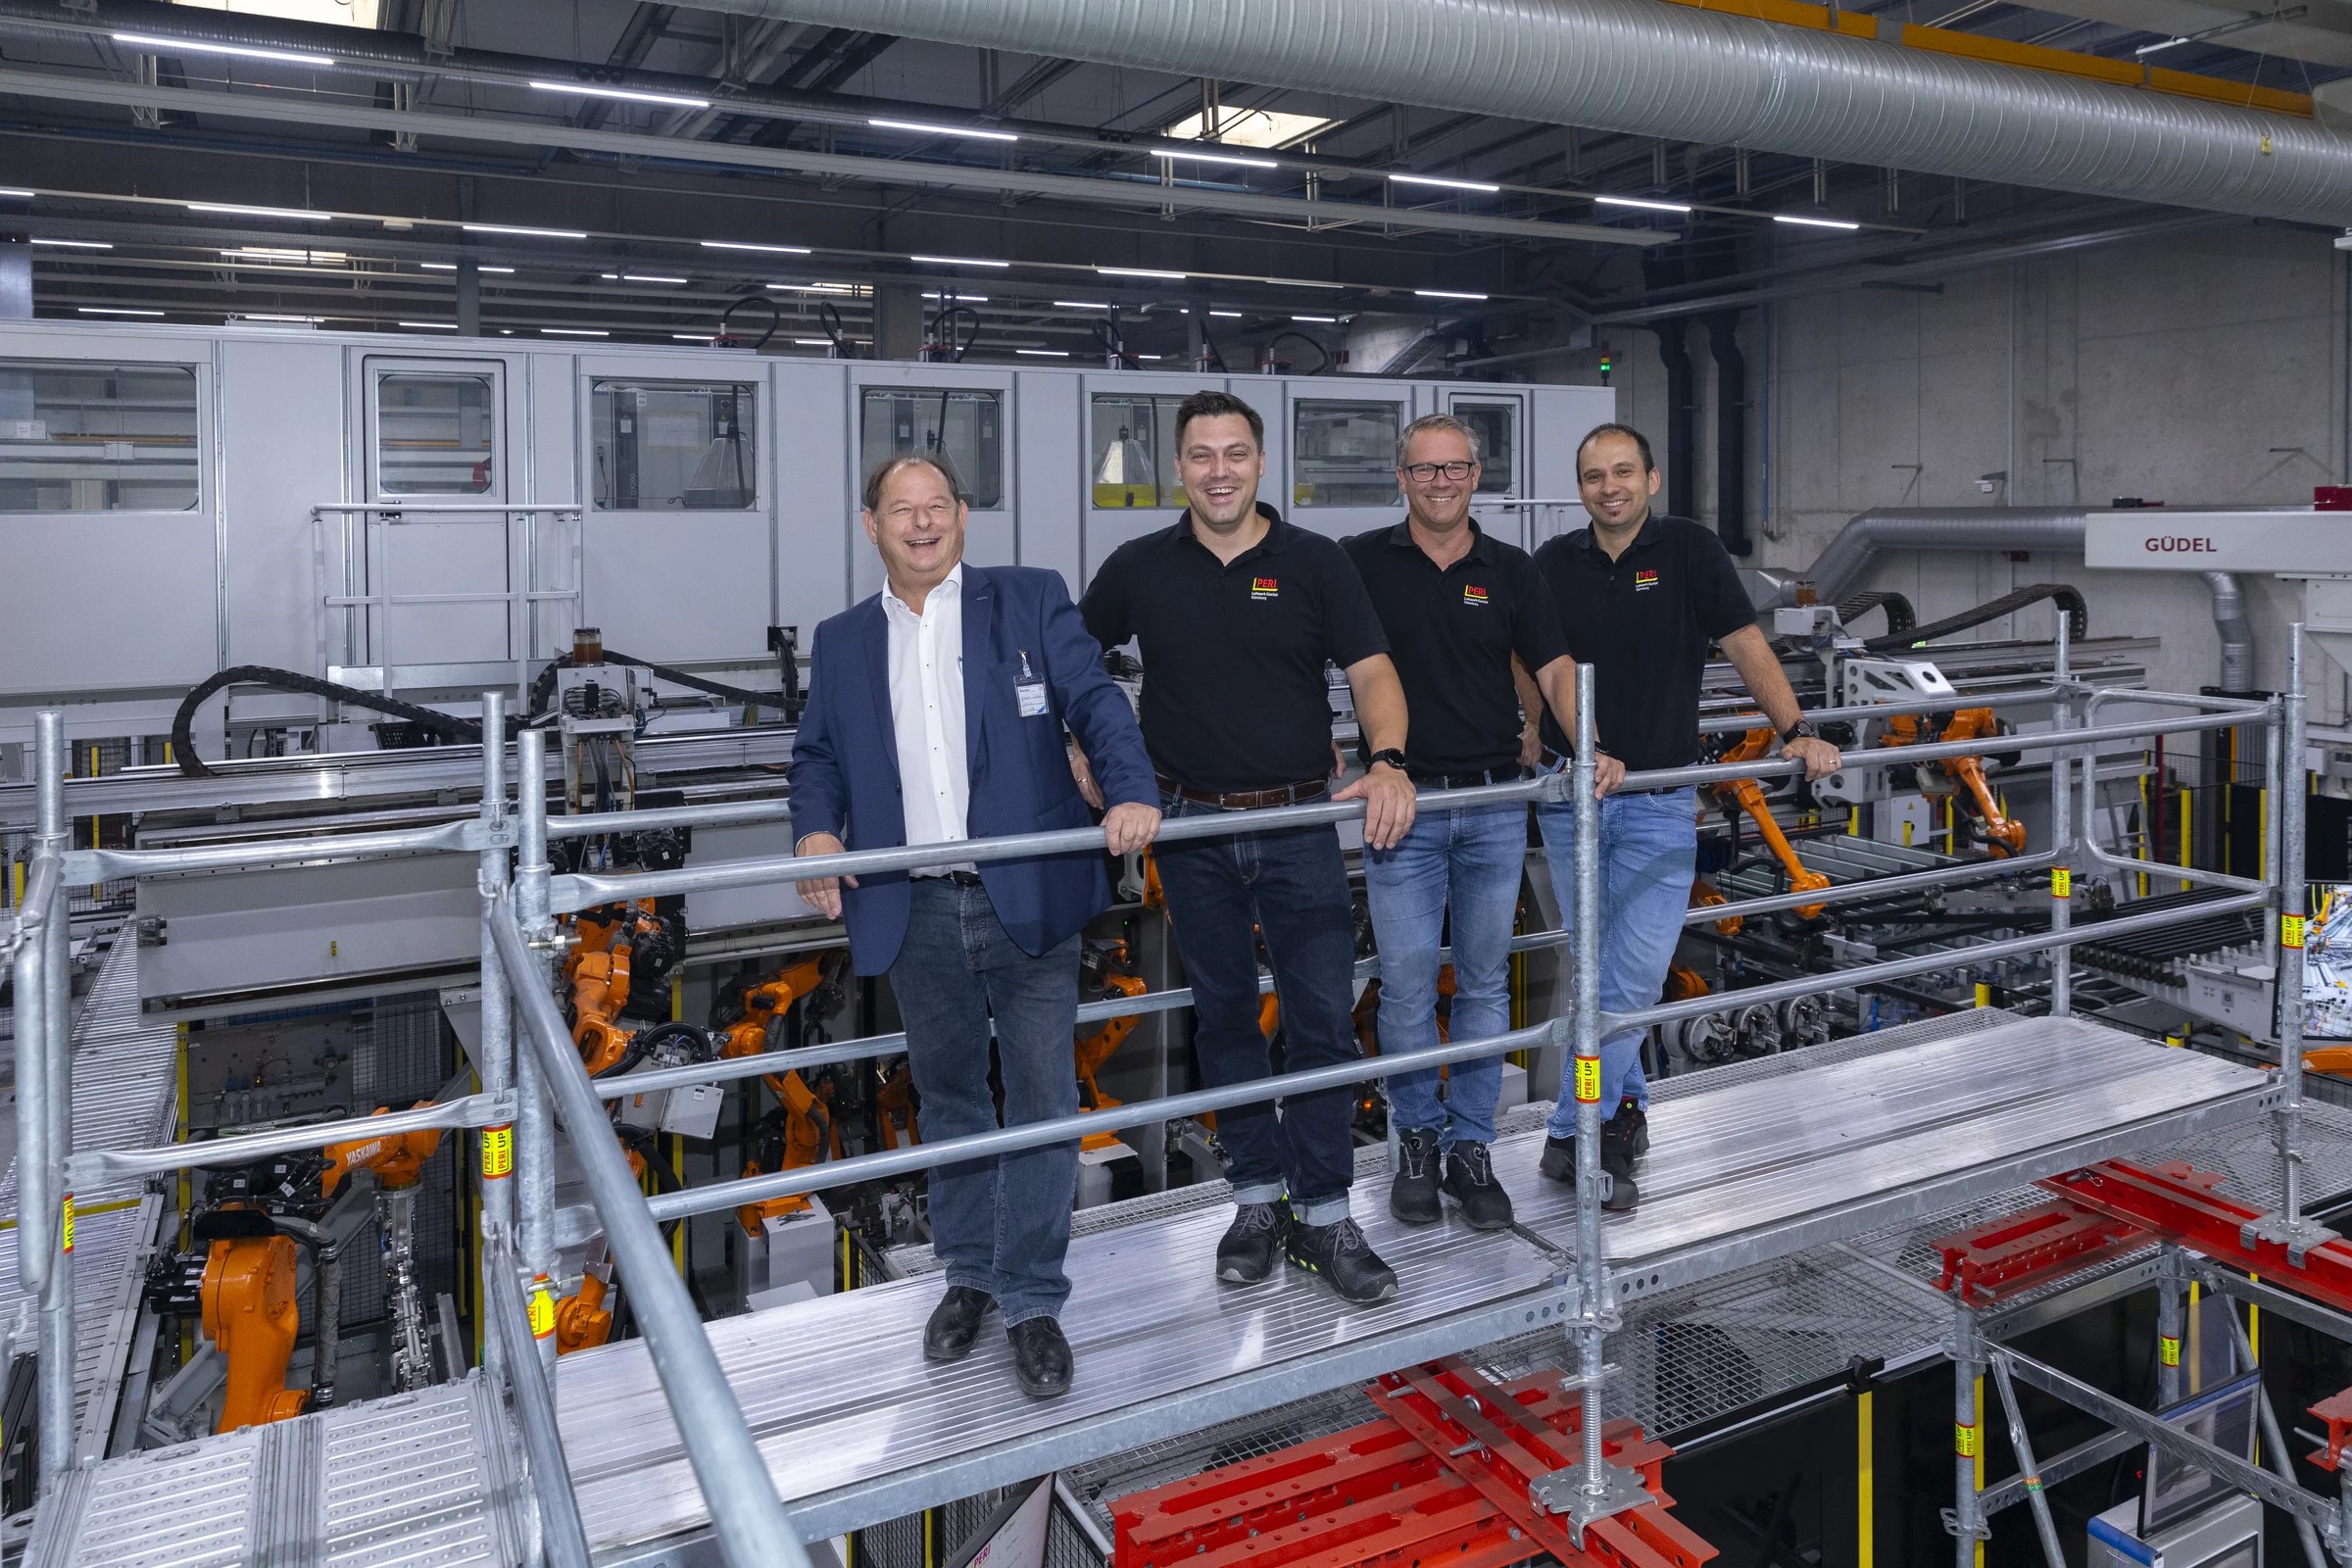 From left to right: Roland Hermann; Christian Merkle (Production Manager), Stephan Schraml (Head of Technology Centre) and Wolfgang Urban (Project Manager) at PERI when the robots were commissioned. (Source: Yaskawa.)